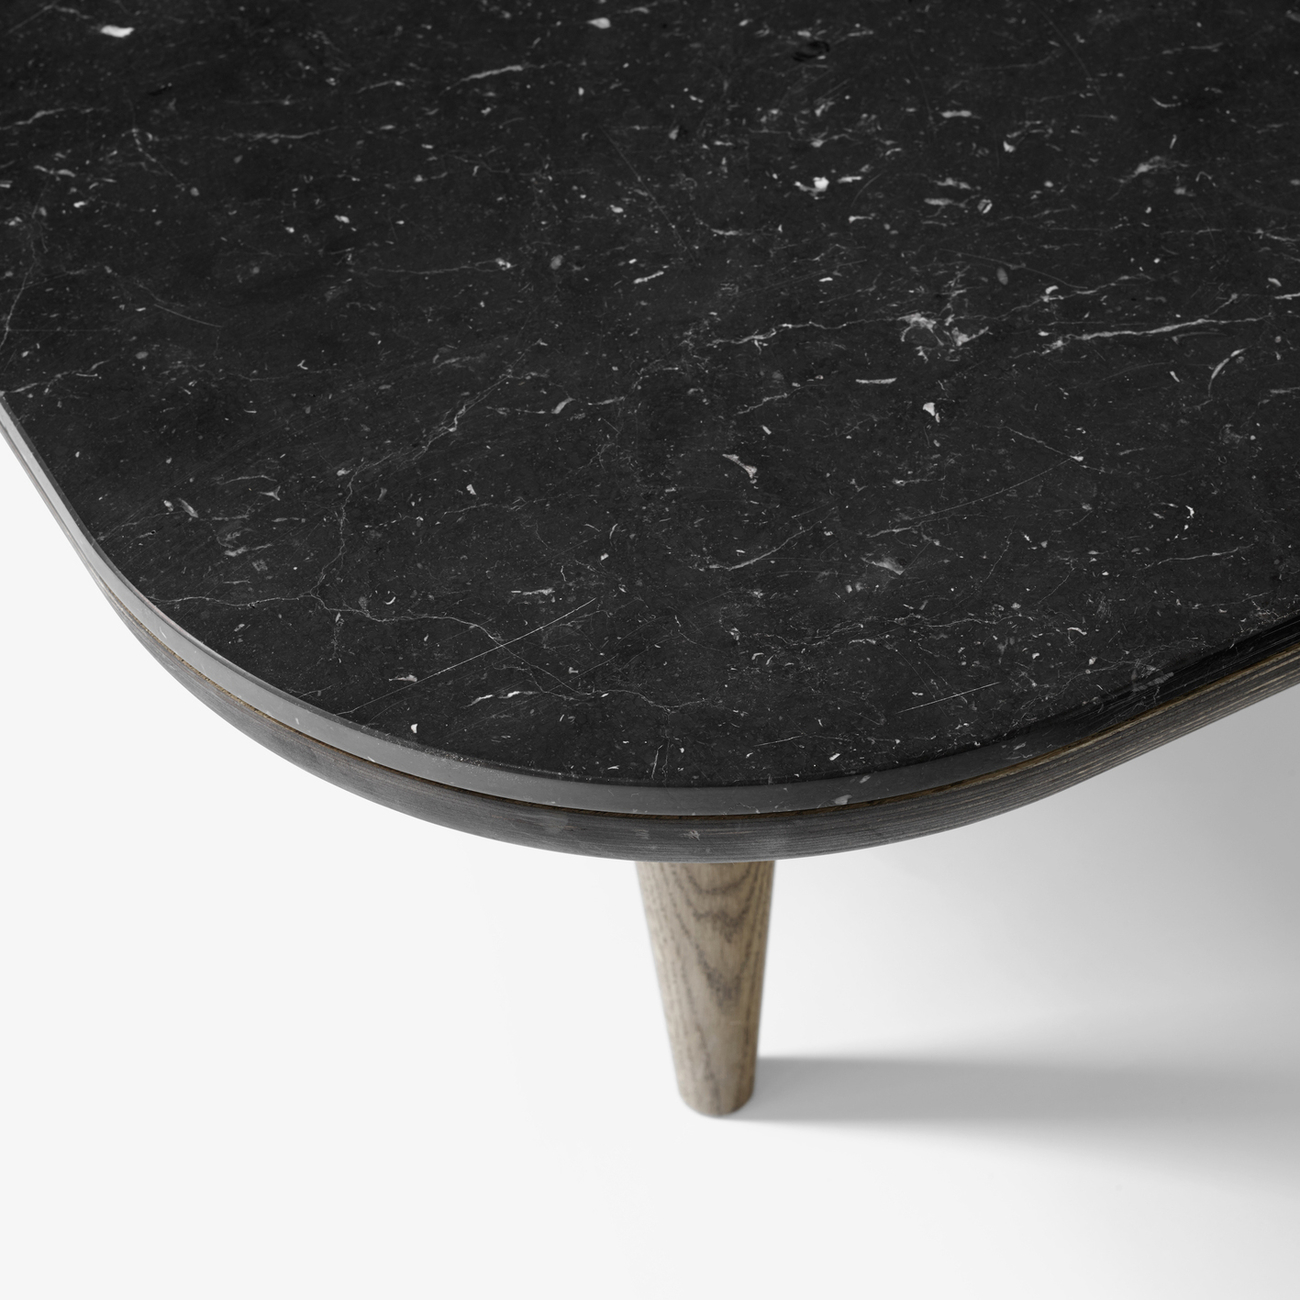 https://www.fundesign.nl/media/catalog/product/f/l/fly_honed-nero-marquina-marble_sc4_cropped.jpg